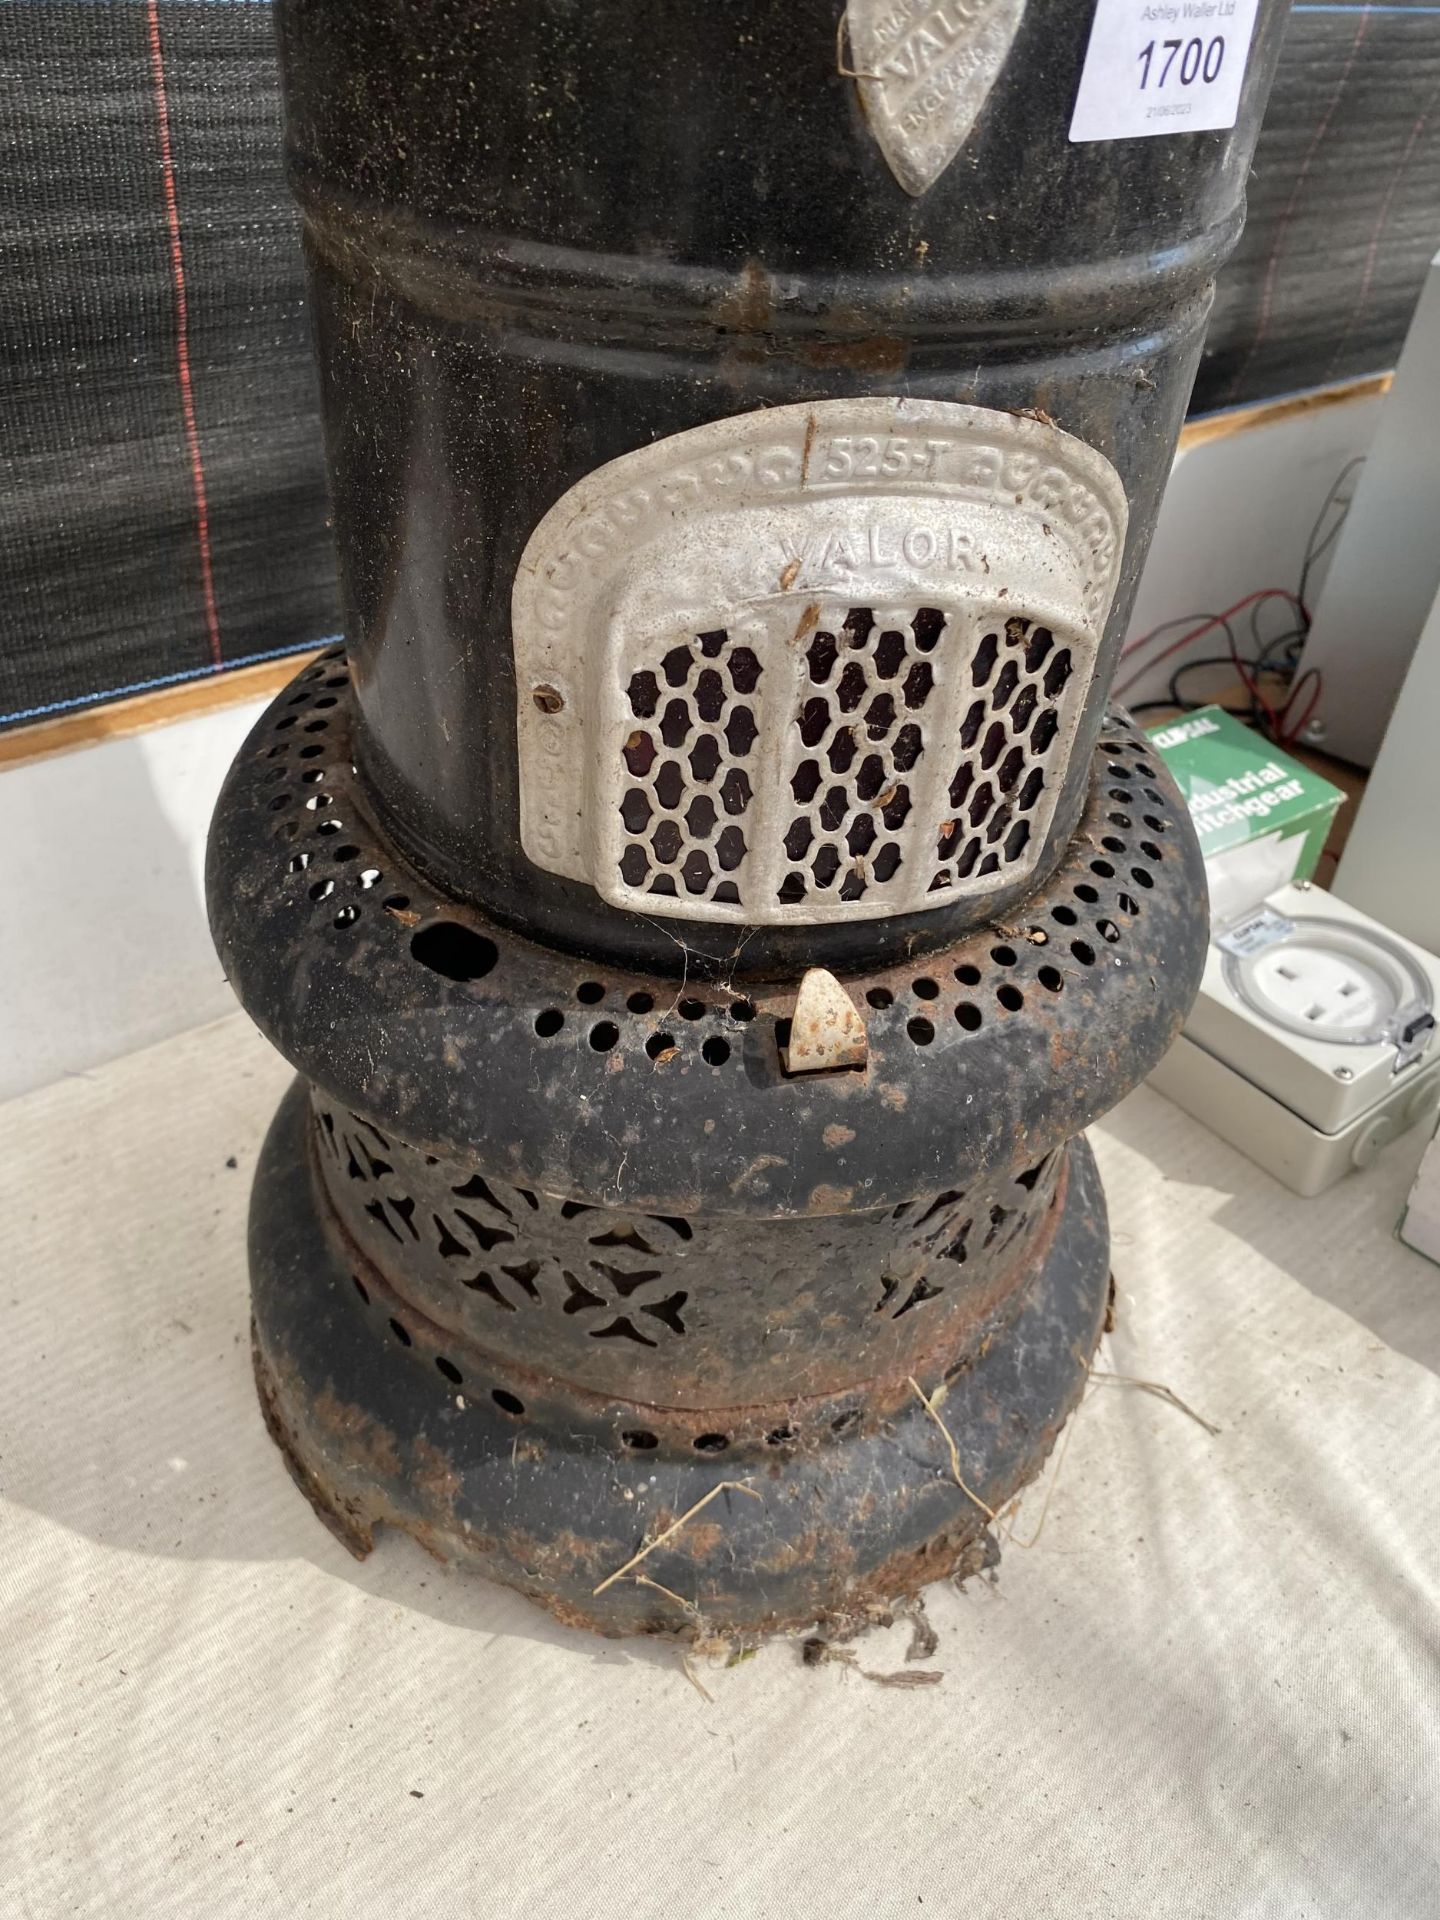 A VINTAGE METAL PARAFIN HEATER - Image 2 of 2